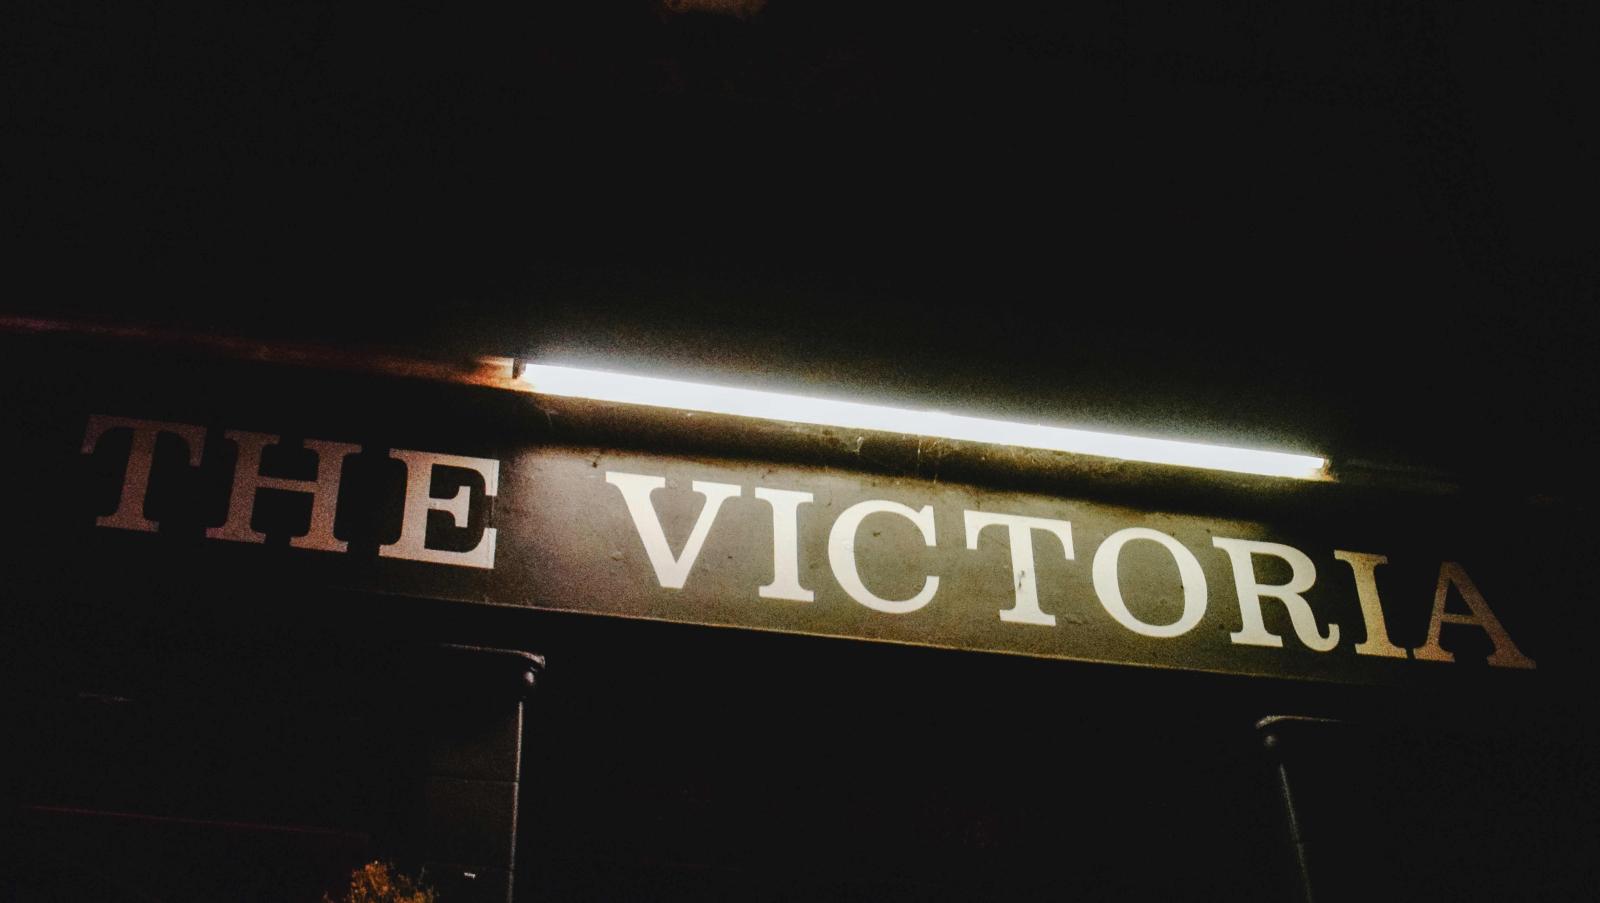 Sign showing Victoria Dalston venue from the outside